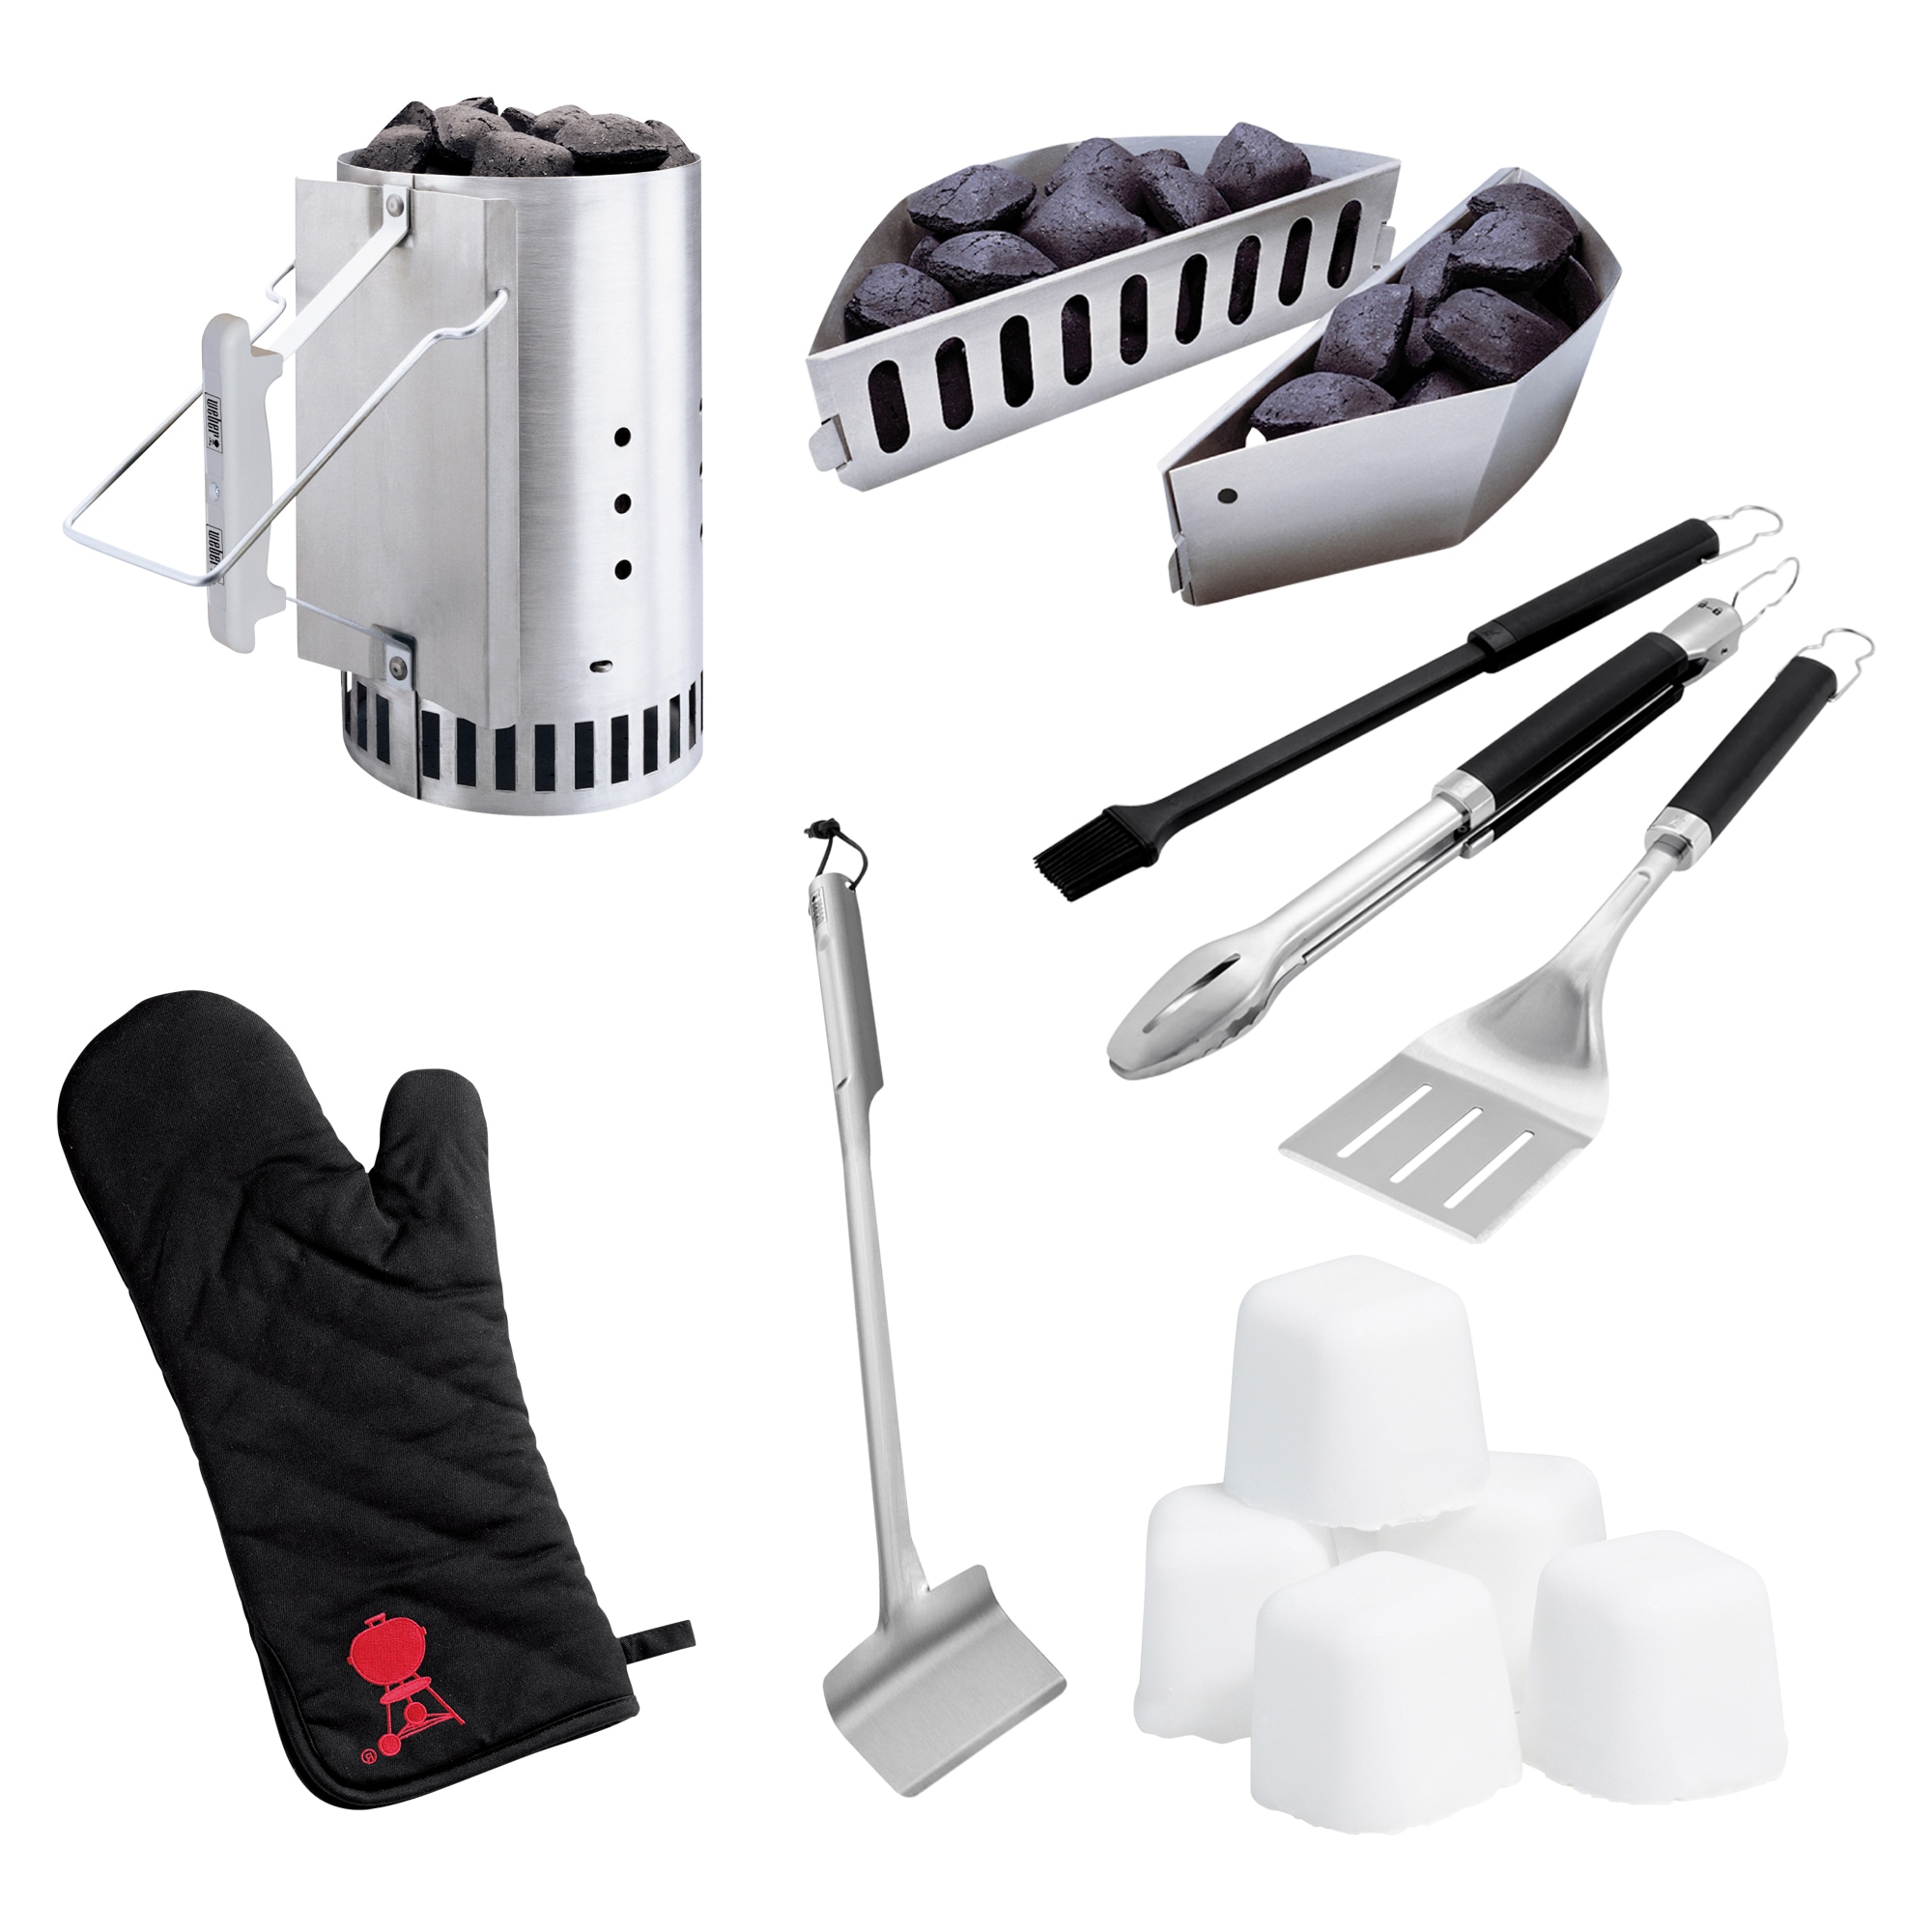 Shop Charcoal Grilling Kit at